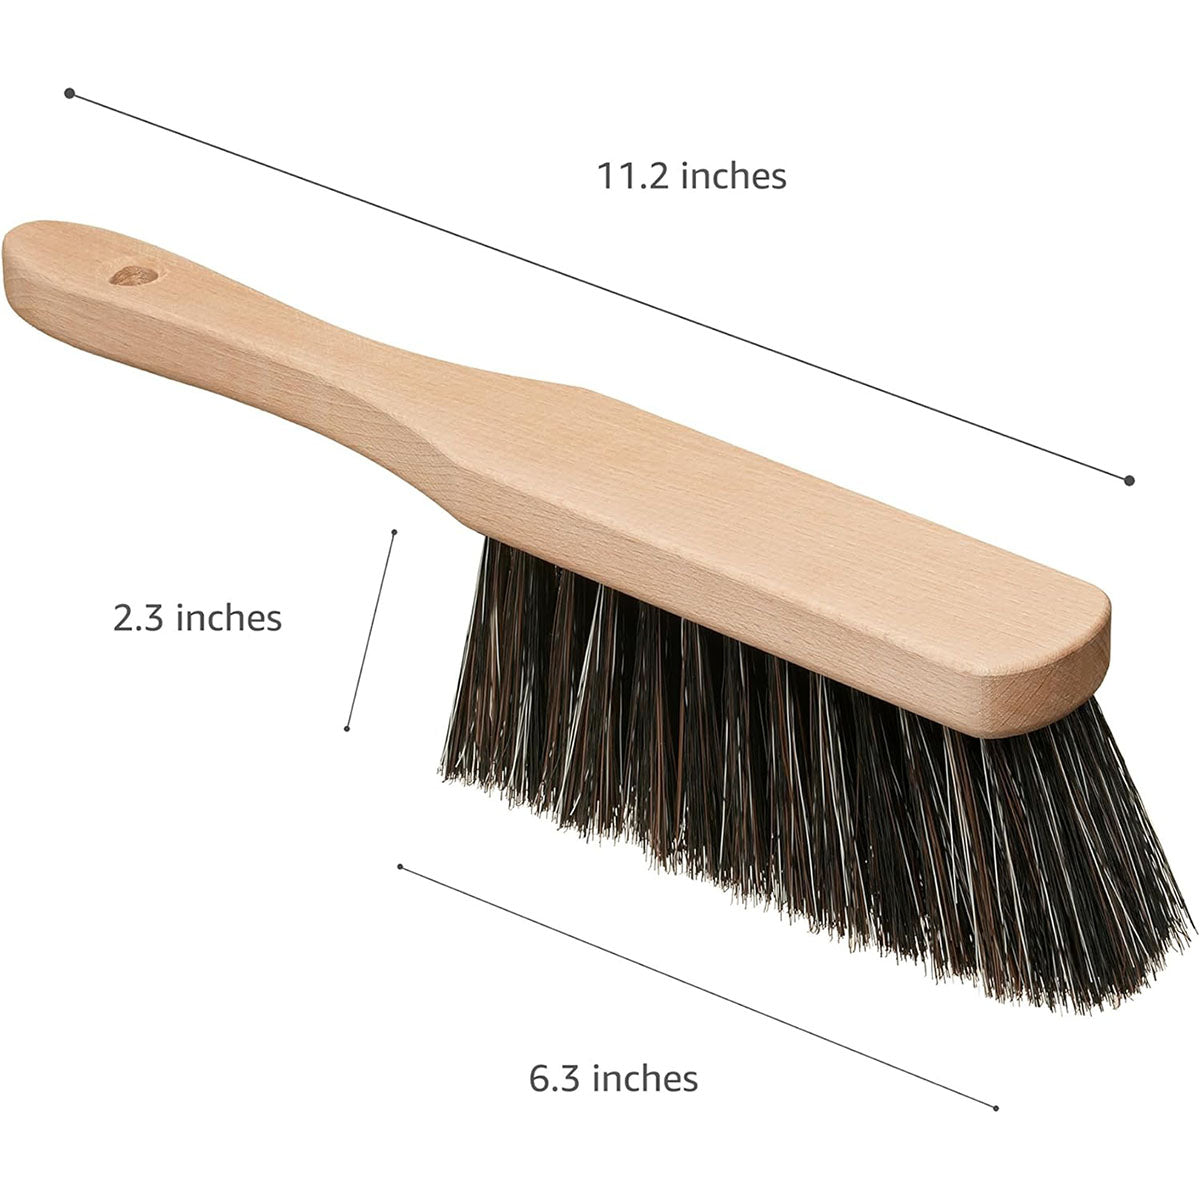 11.2" Hand Broom Soft Bristles Cleaning Brush, Dusting Brush with Wooden Handle